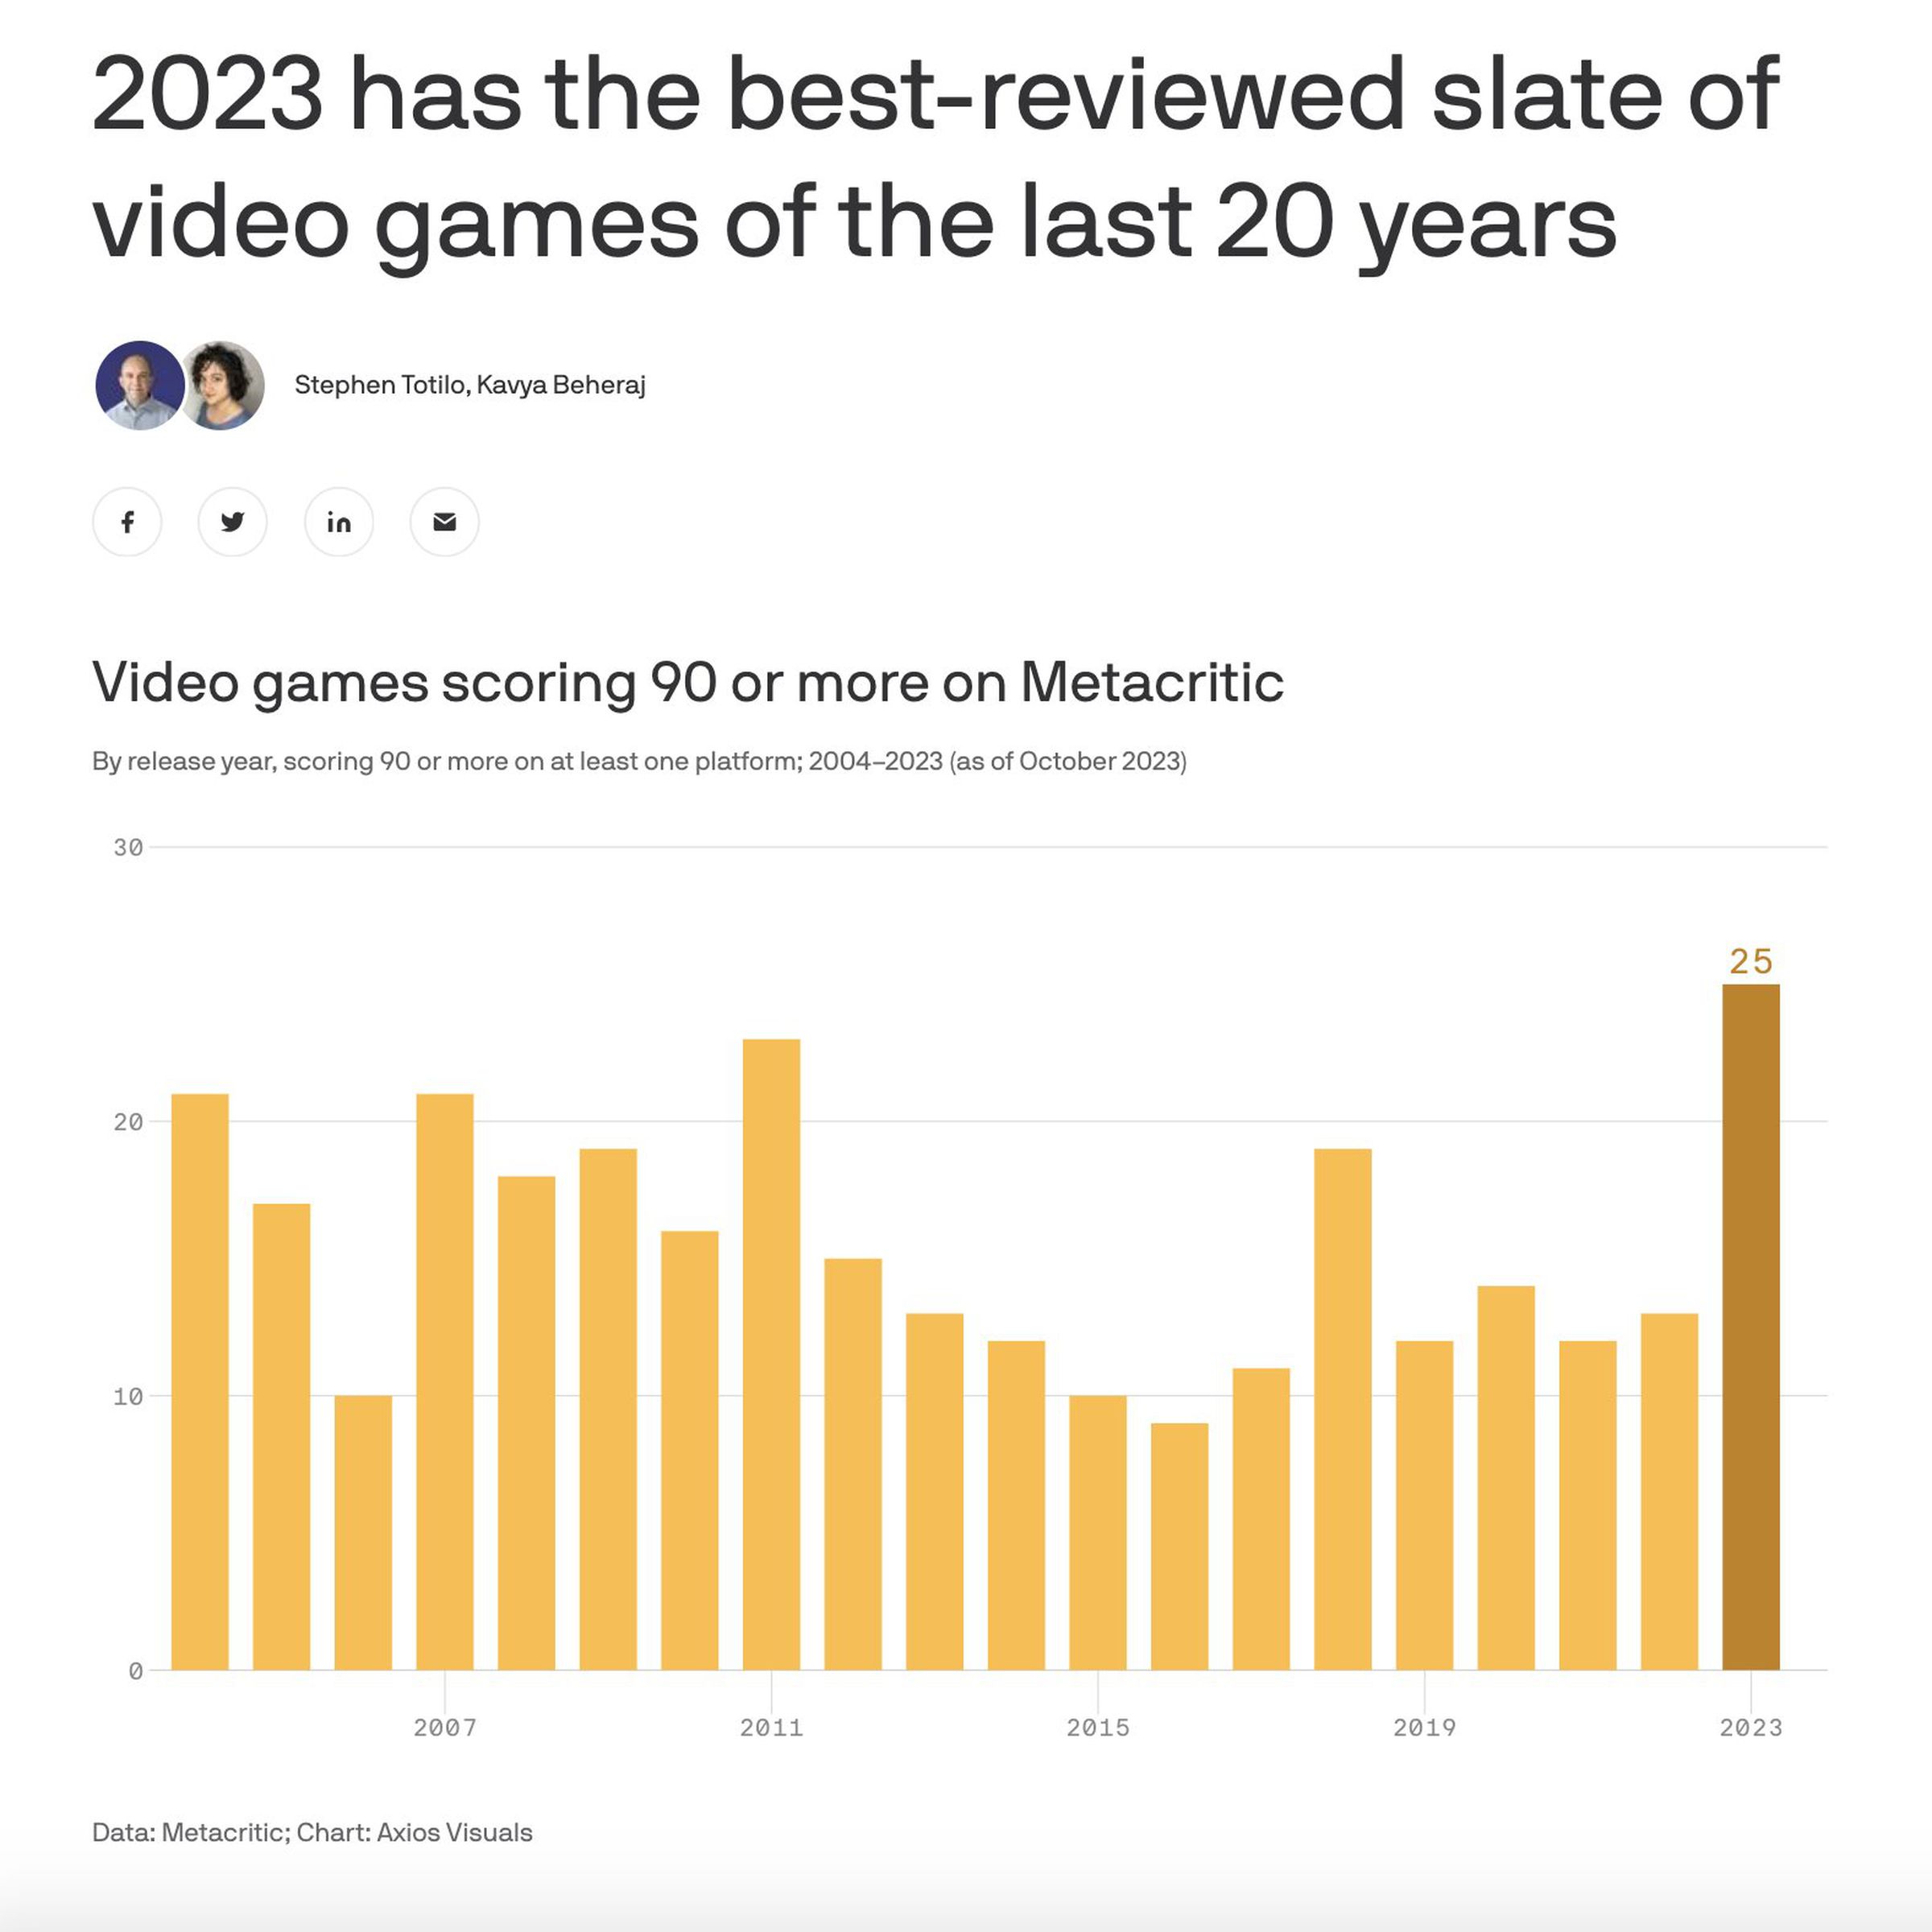 Image of a graph illustrating the number of games with a Metacritic score of 90 plotted over the years 2004-2023. 2023 has the highest number of games over that period.